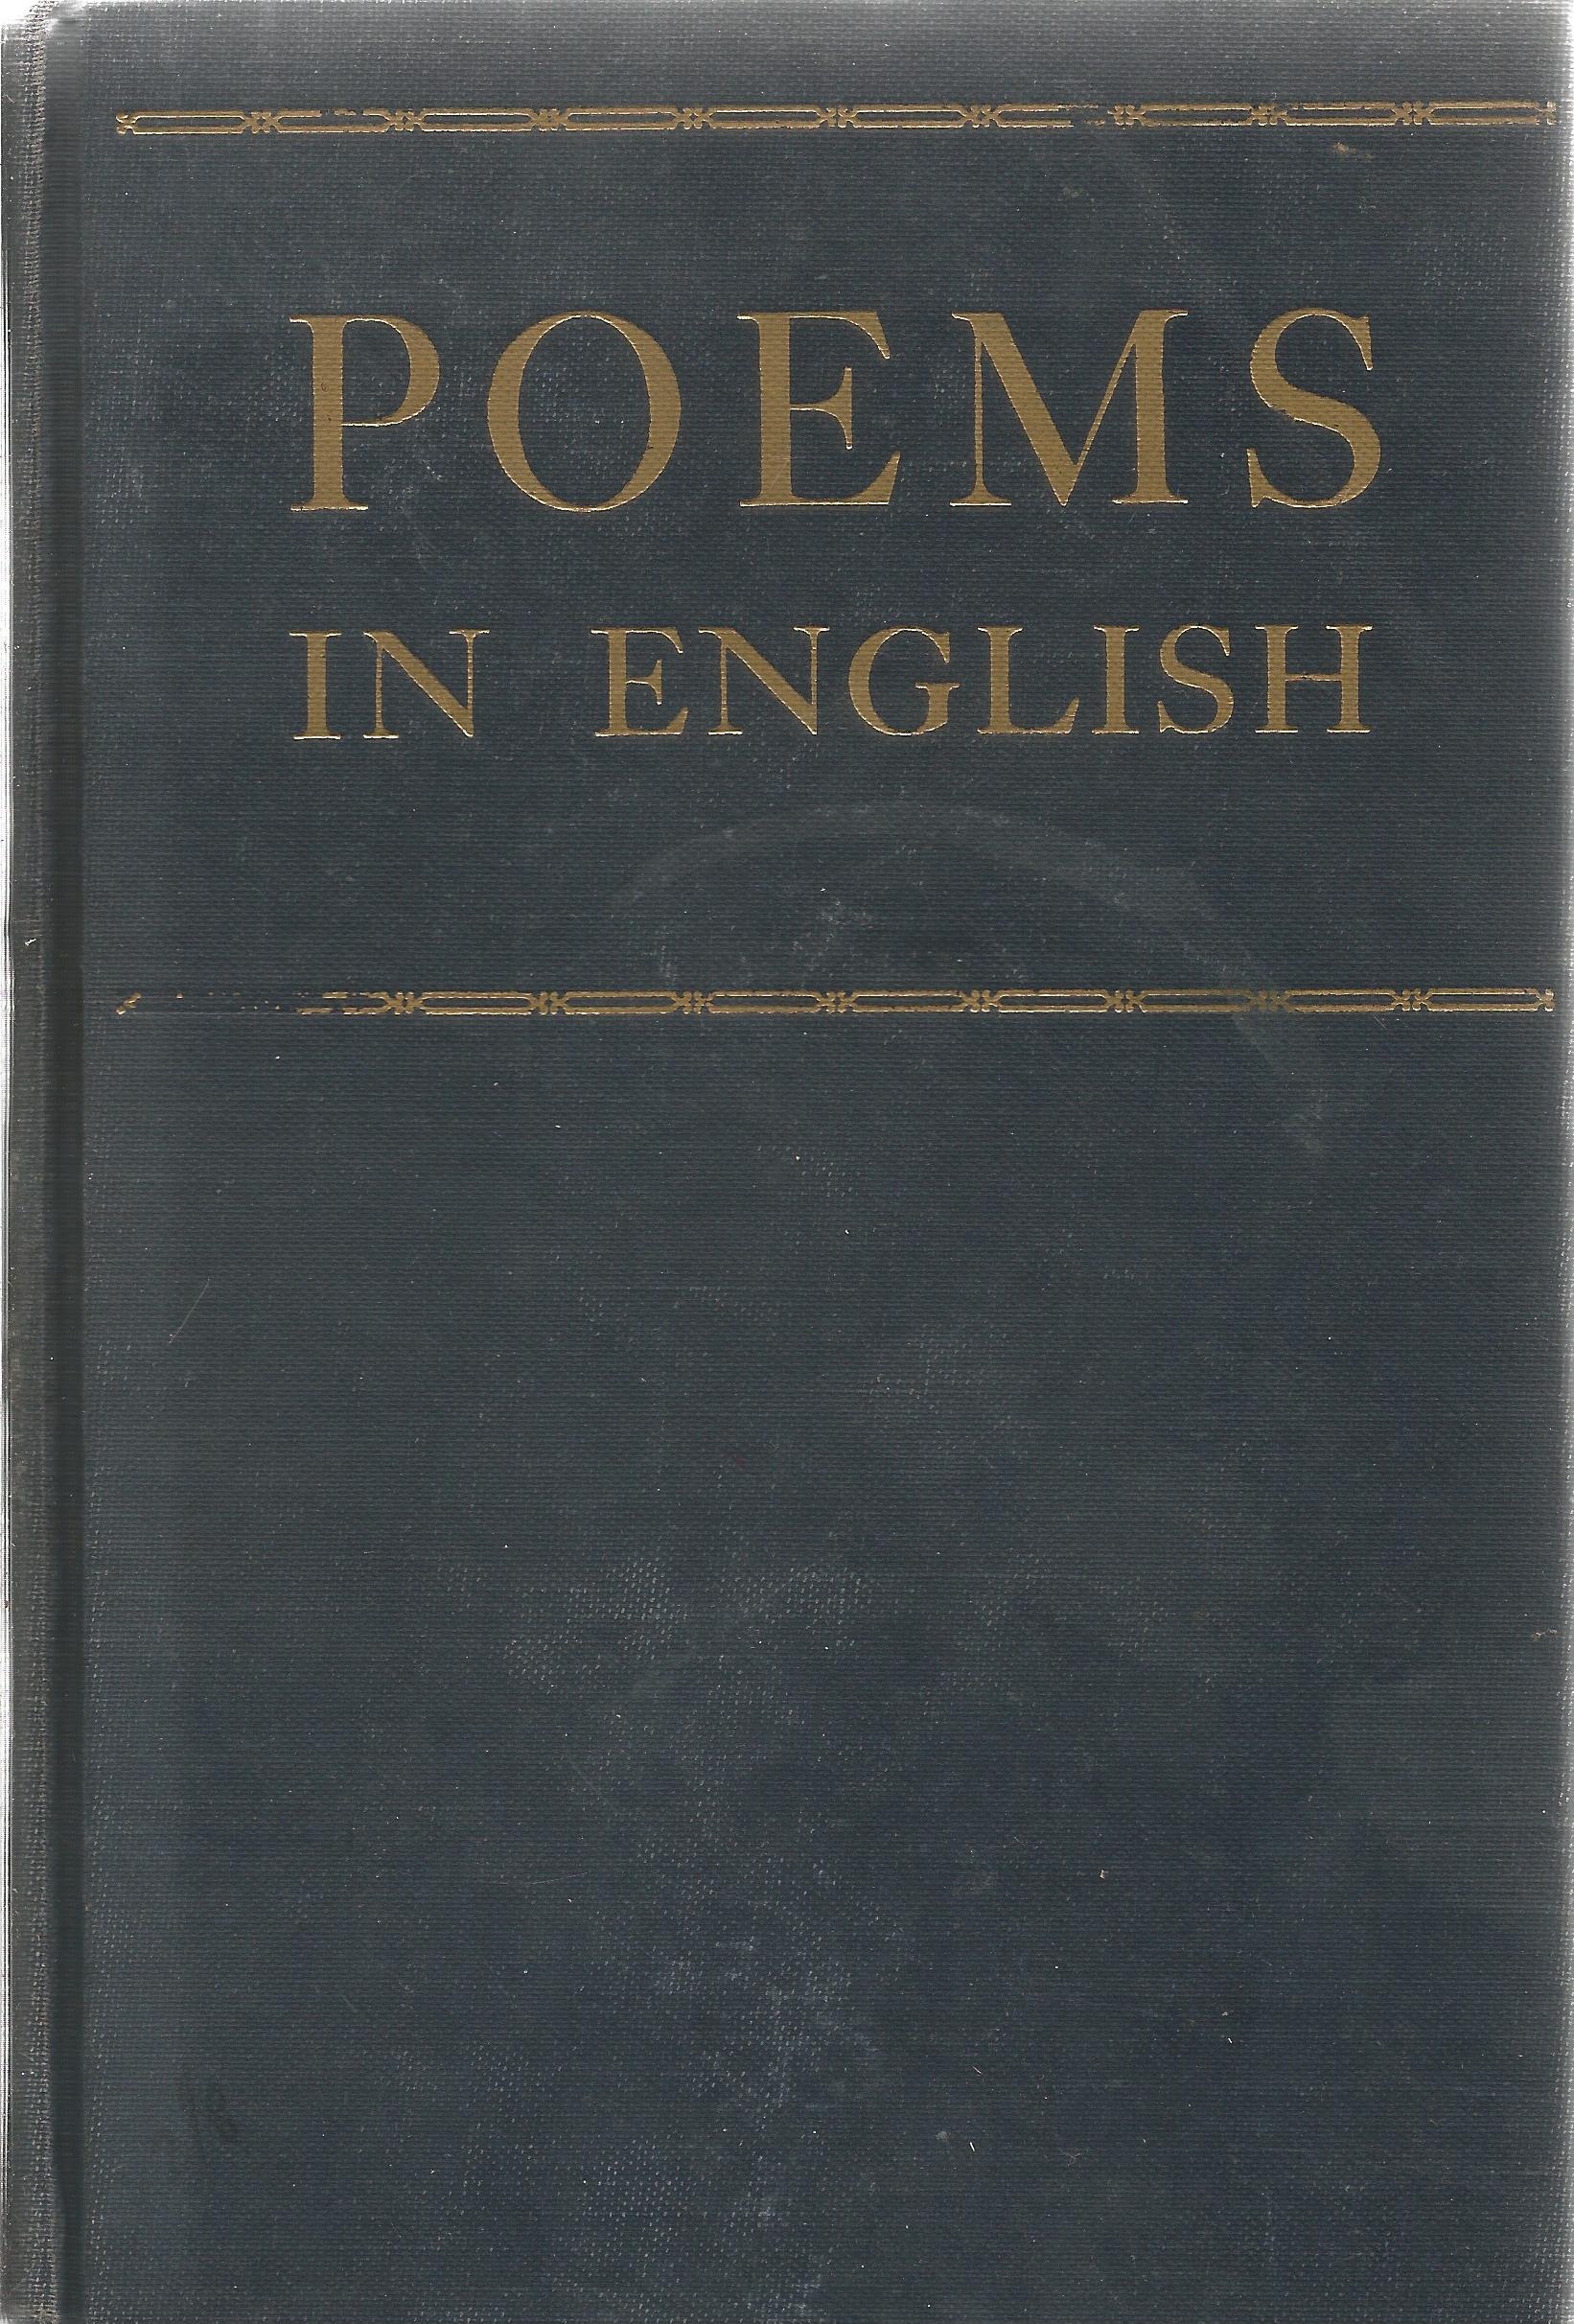 Poems in English 1530 1940 by David Daiches Hardback Book 1950 First Edition published by The Ronald